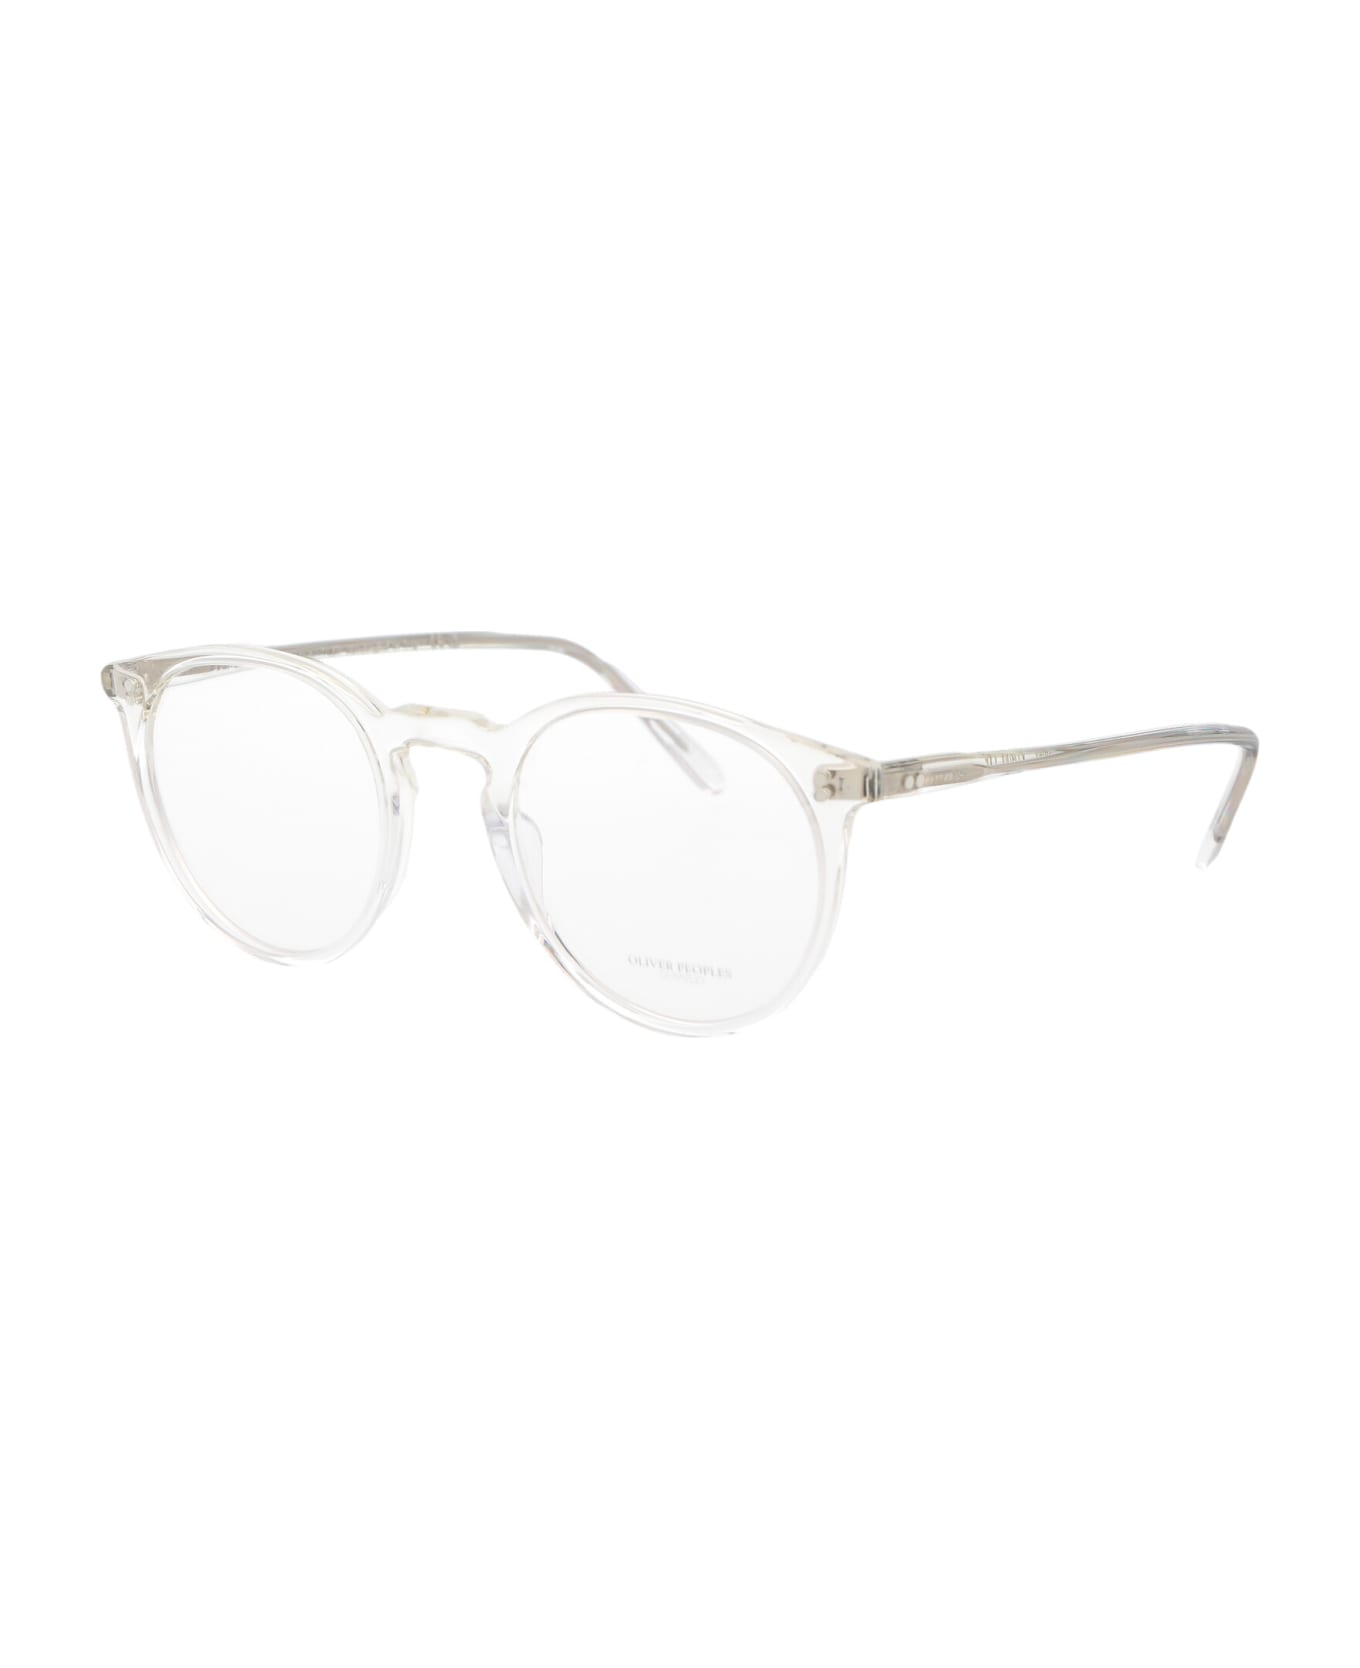 Oliver Peoples O'malley Glasses - 1755 Buff/Crystal Gradient アイウェア